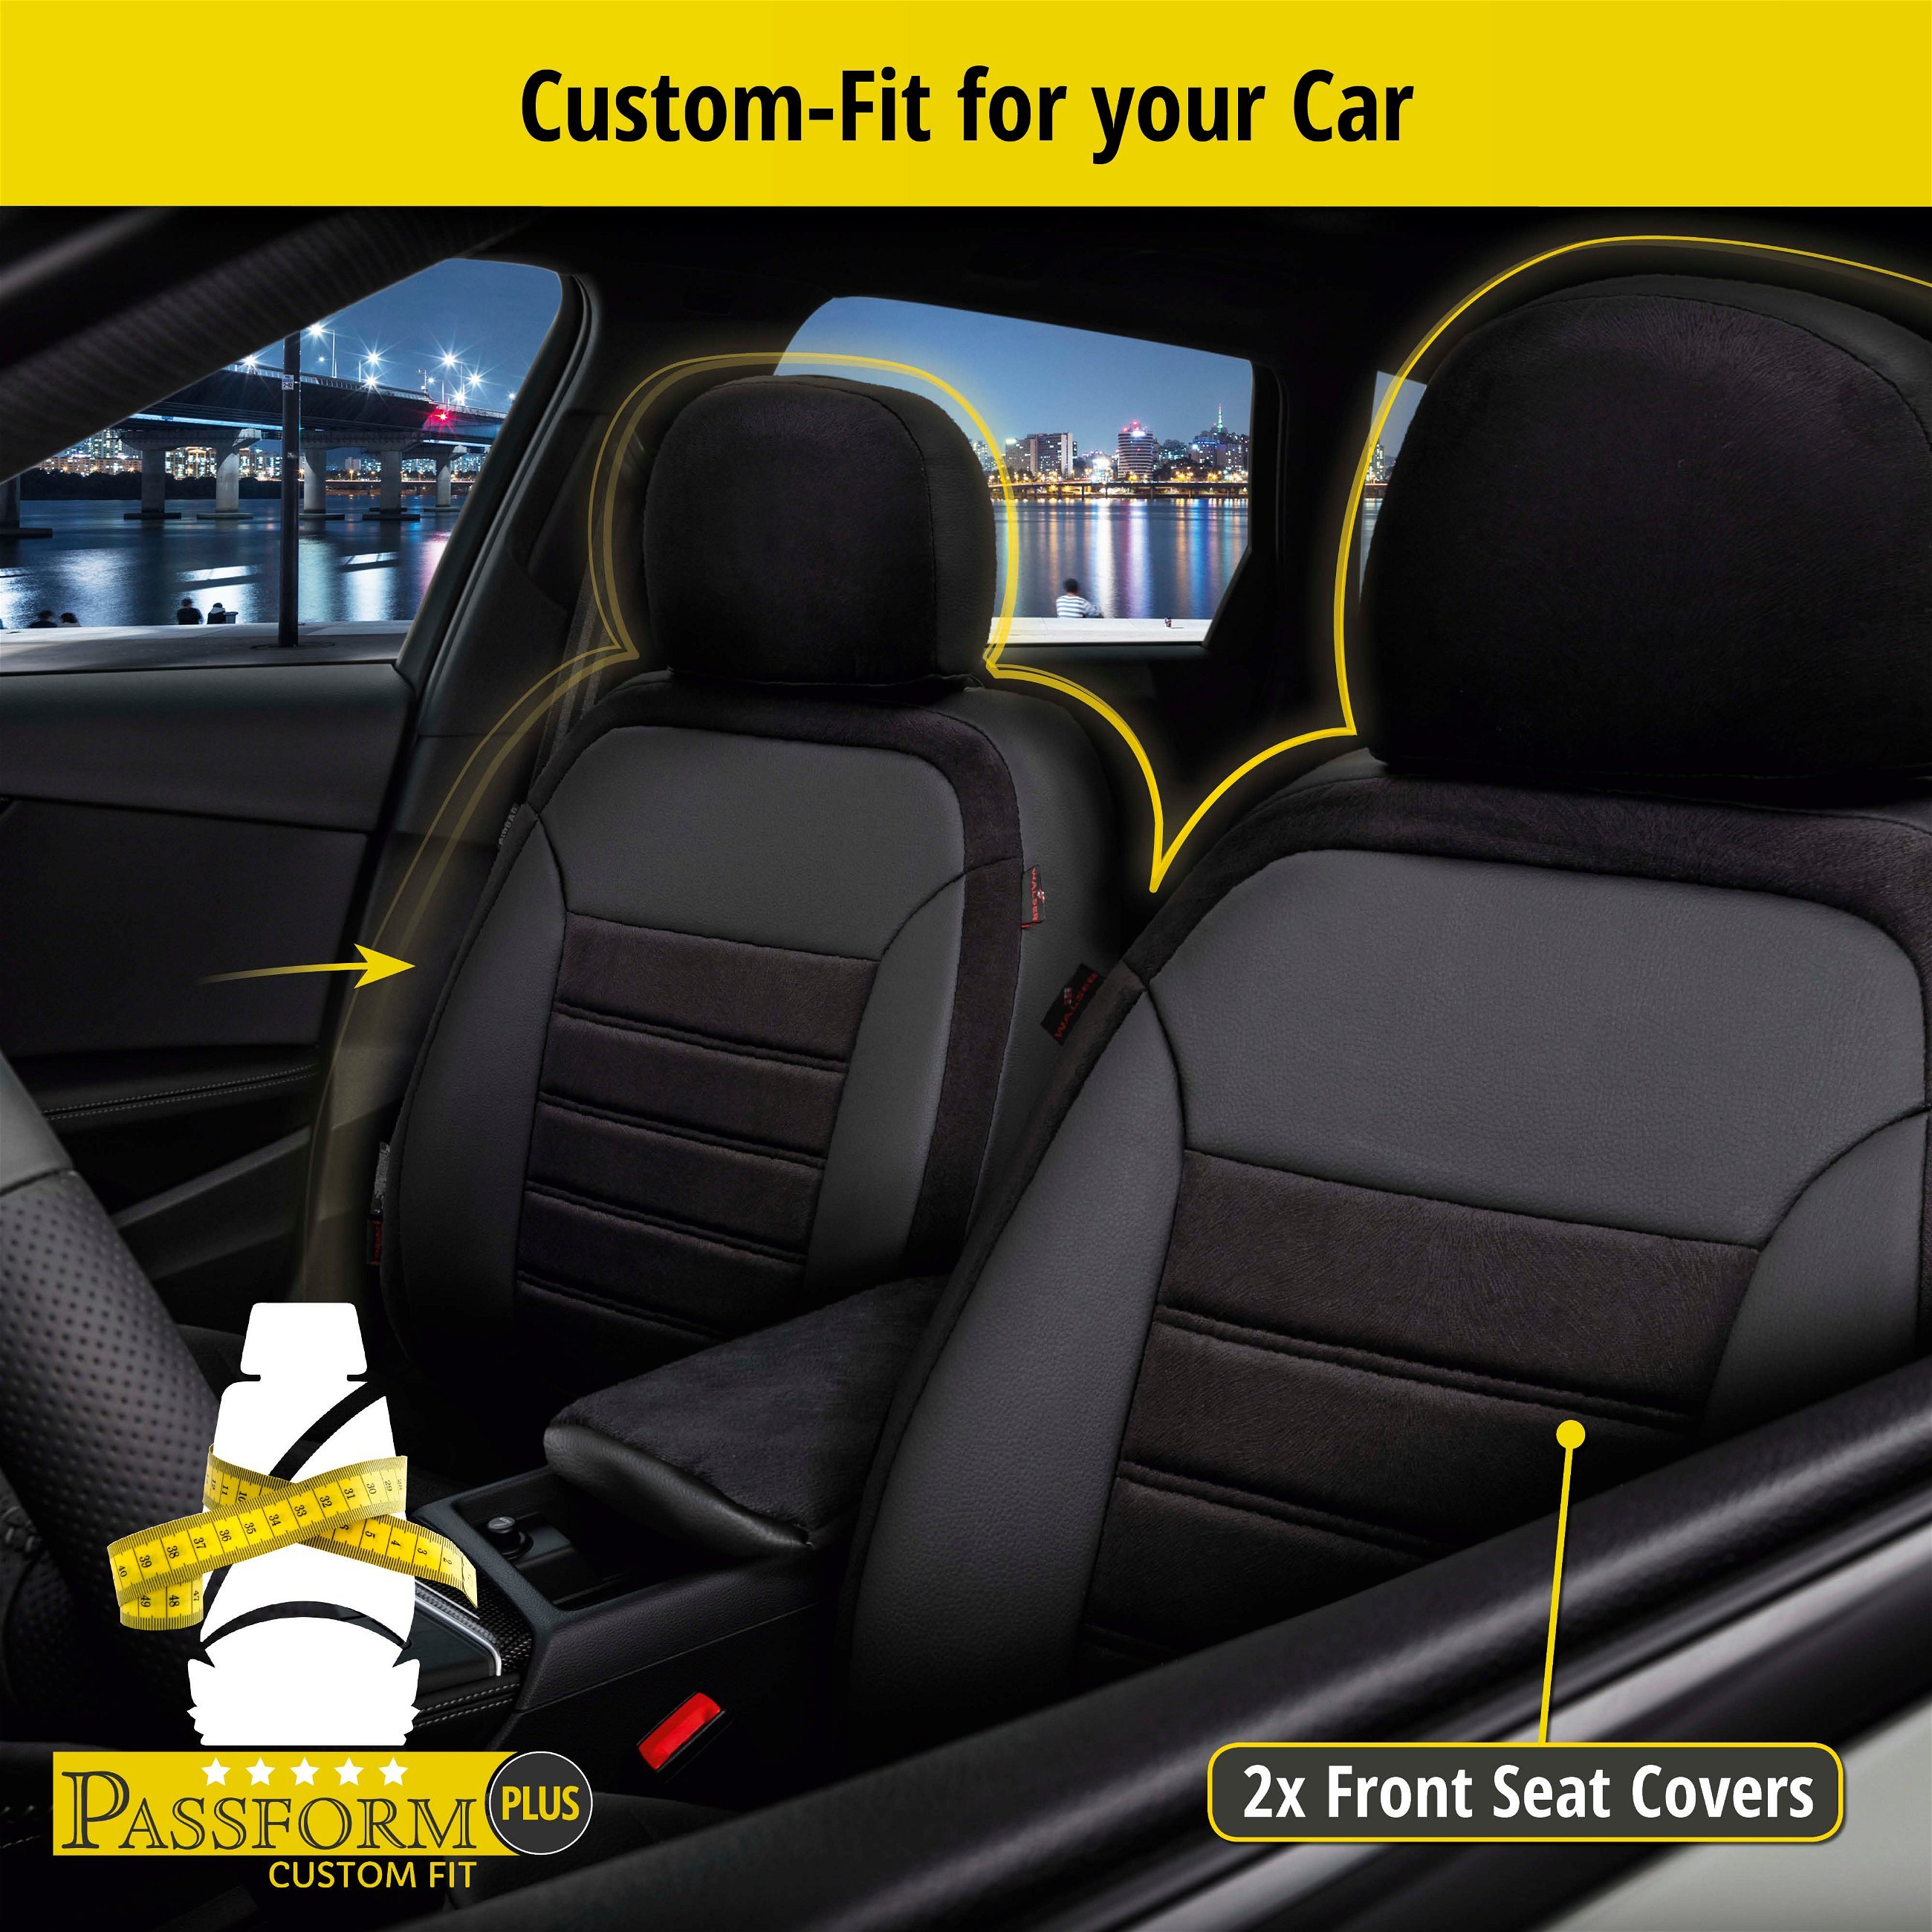 Seat Cover Bari for Opel Mokka/Mokka X (J13) 06/2012-Today, 2 seat covers for normal seats